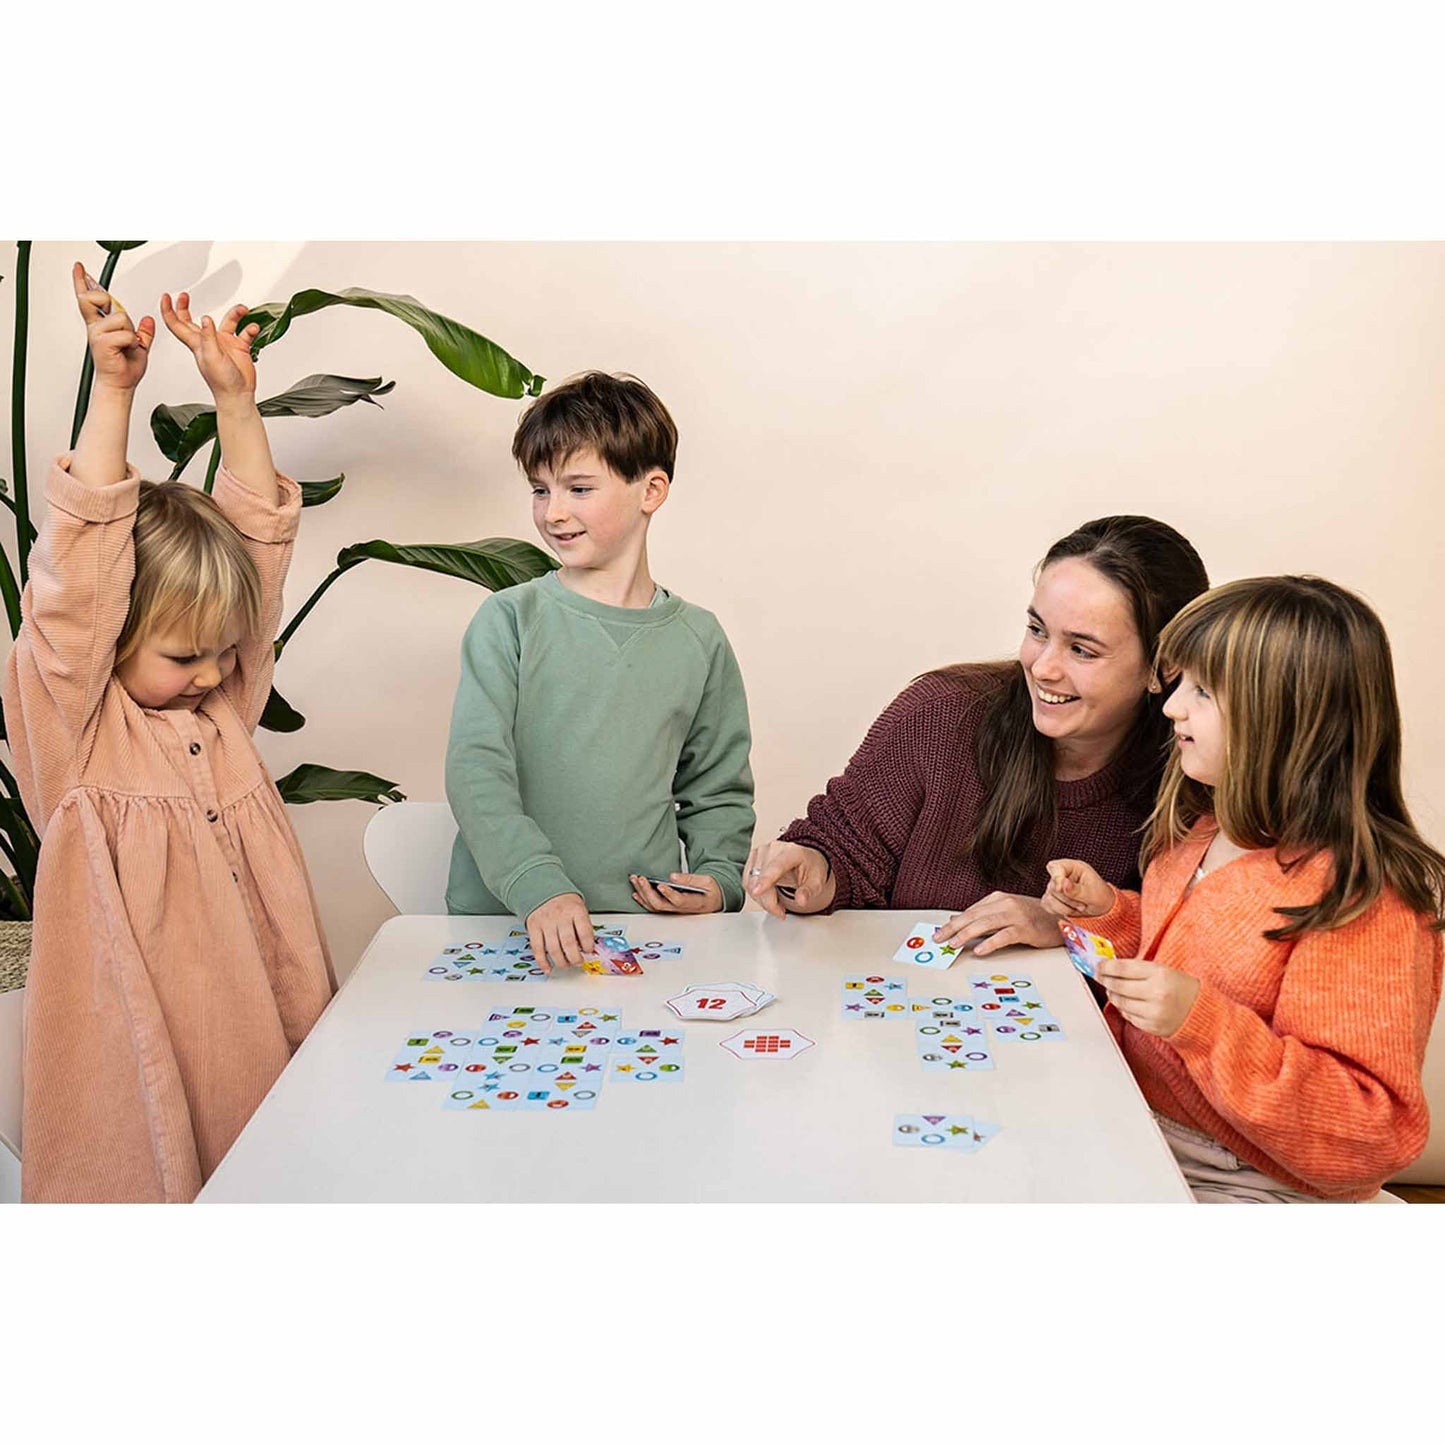 Photo of group of people playing Pattern Party by FLEXIQ.